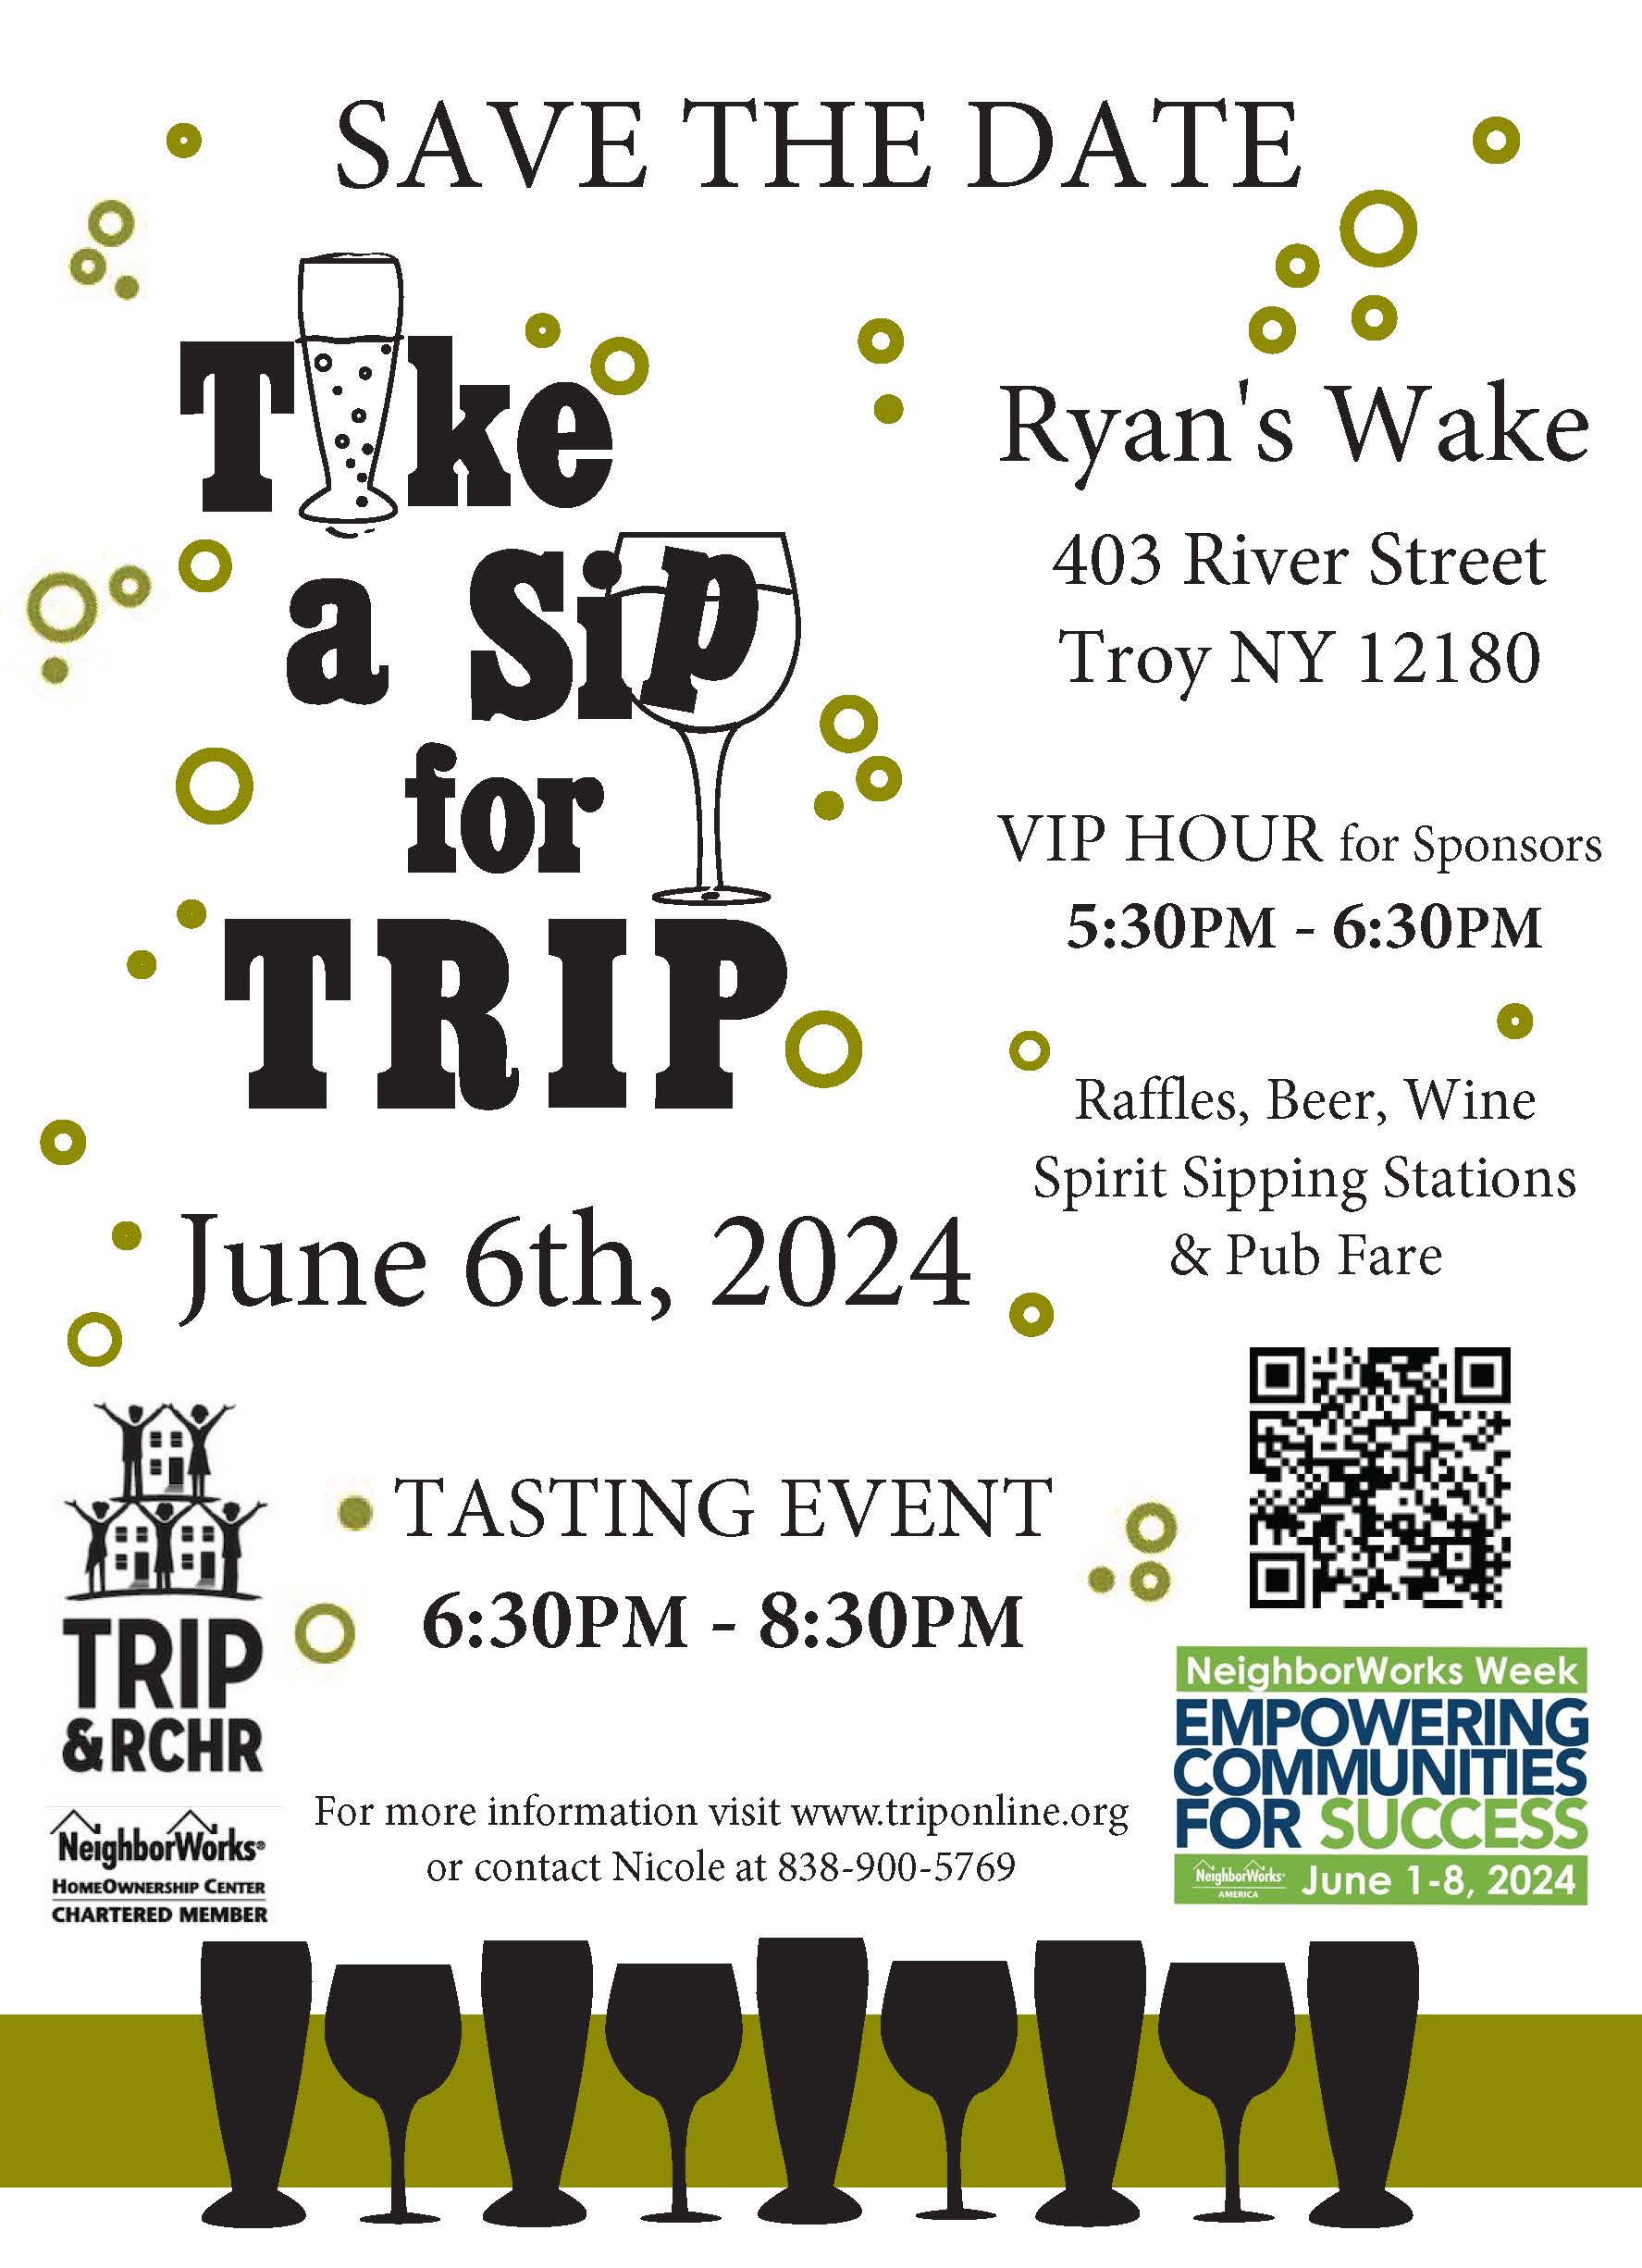 "Take a Sip for Trip" save the date for June 6th, 2024 at Ryan's Wake